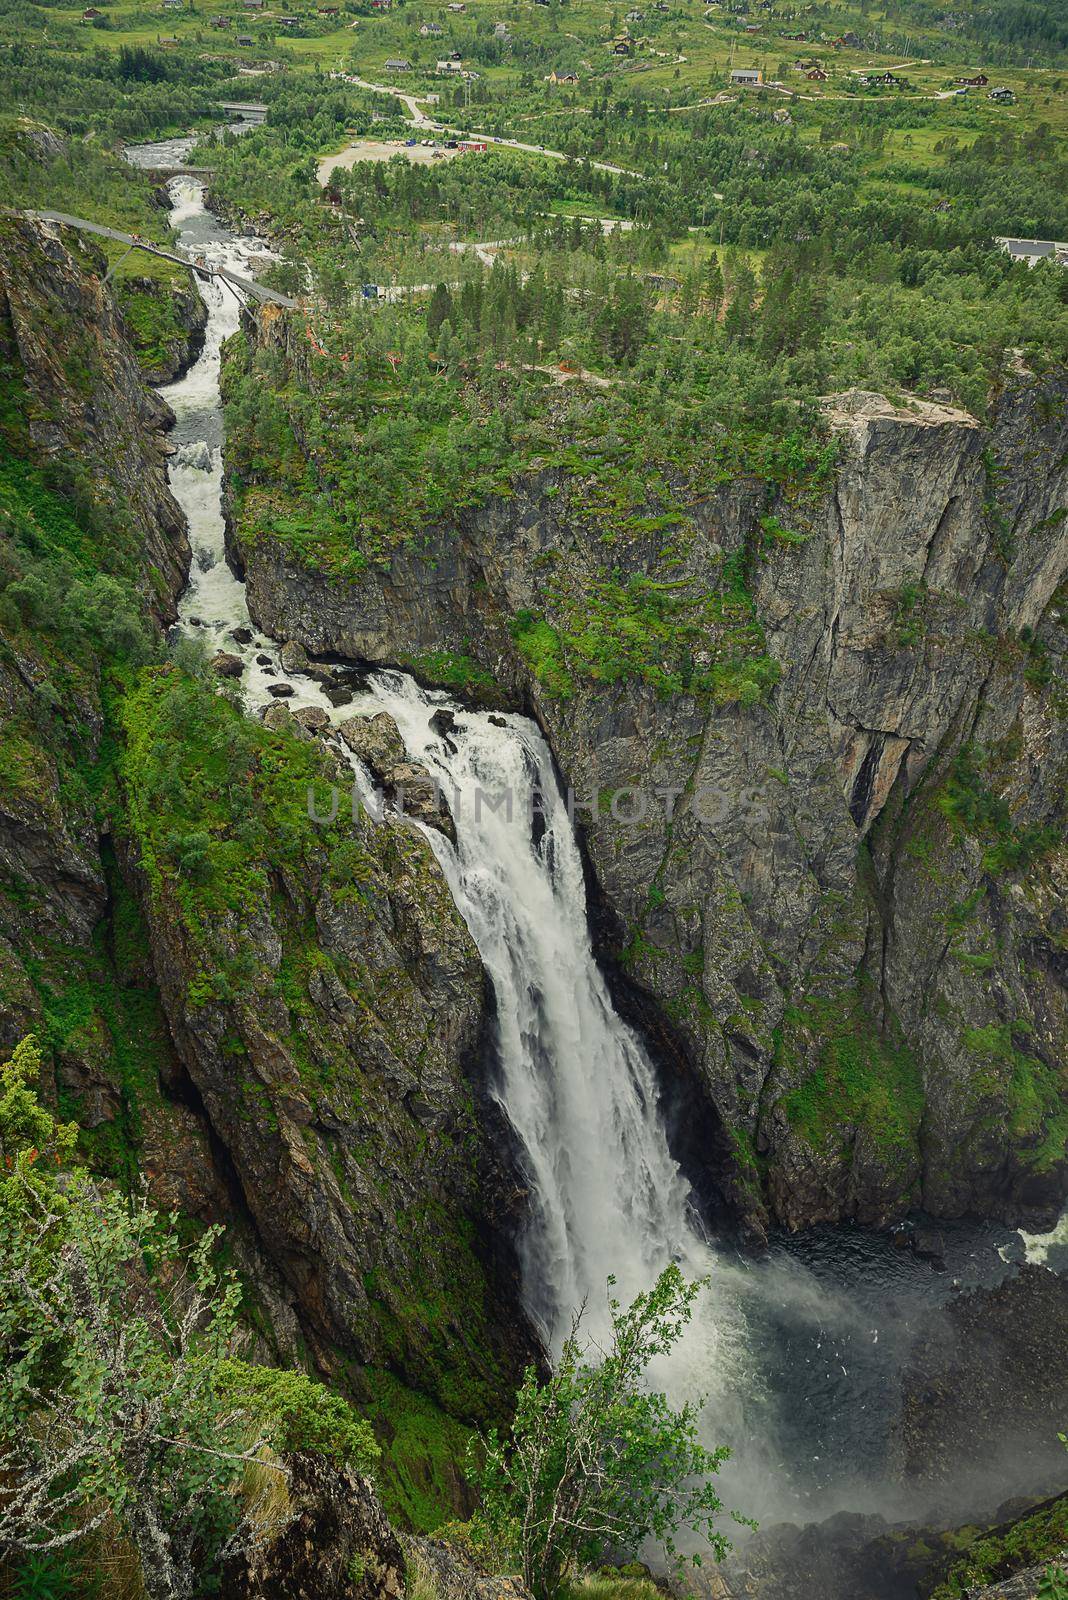 Vøringsfossen - Vøring Falls -  is located in Eidfjord, Hardanger, at the top of Måbødalen. The falls is one of the most popular and visited attraction in Norway. It is possible to see the falls from above, or even after a short hiking it is possible to witness the falls from below. Either way, it is one of the most spectacular experience one will have visiting Norway.